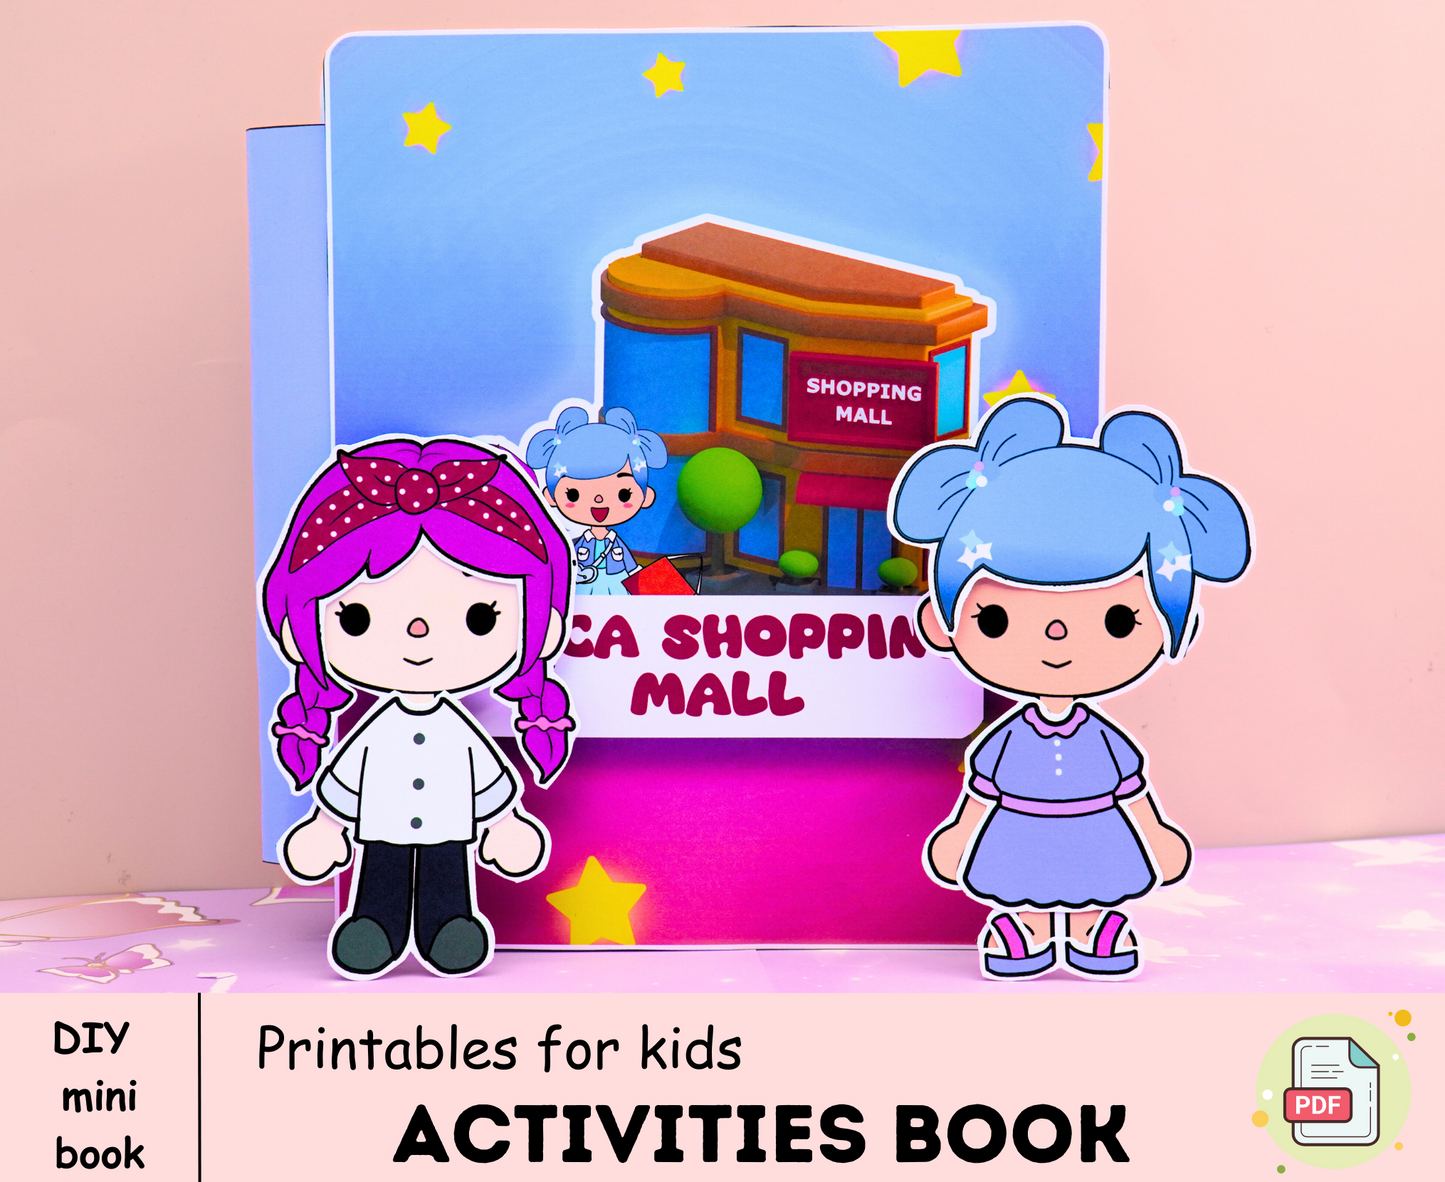 Toca Boca printable paper doll🌈 Shopping mall dress up activity quiet book | DIY doll house craft for kids activity pretend play paper doll 🌈 Woa Doll Crafts